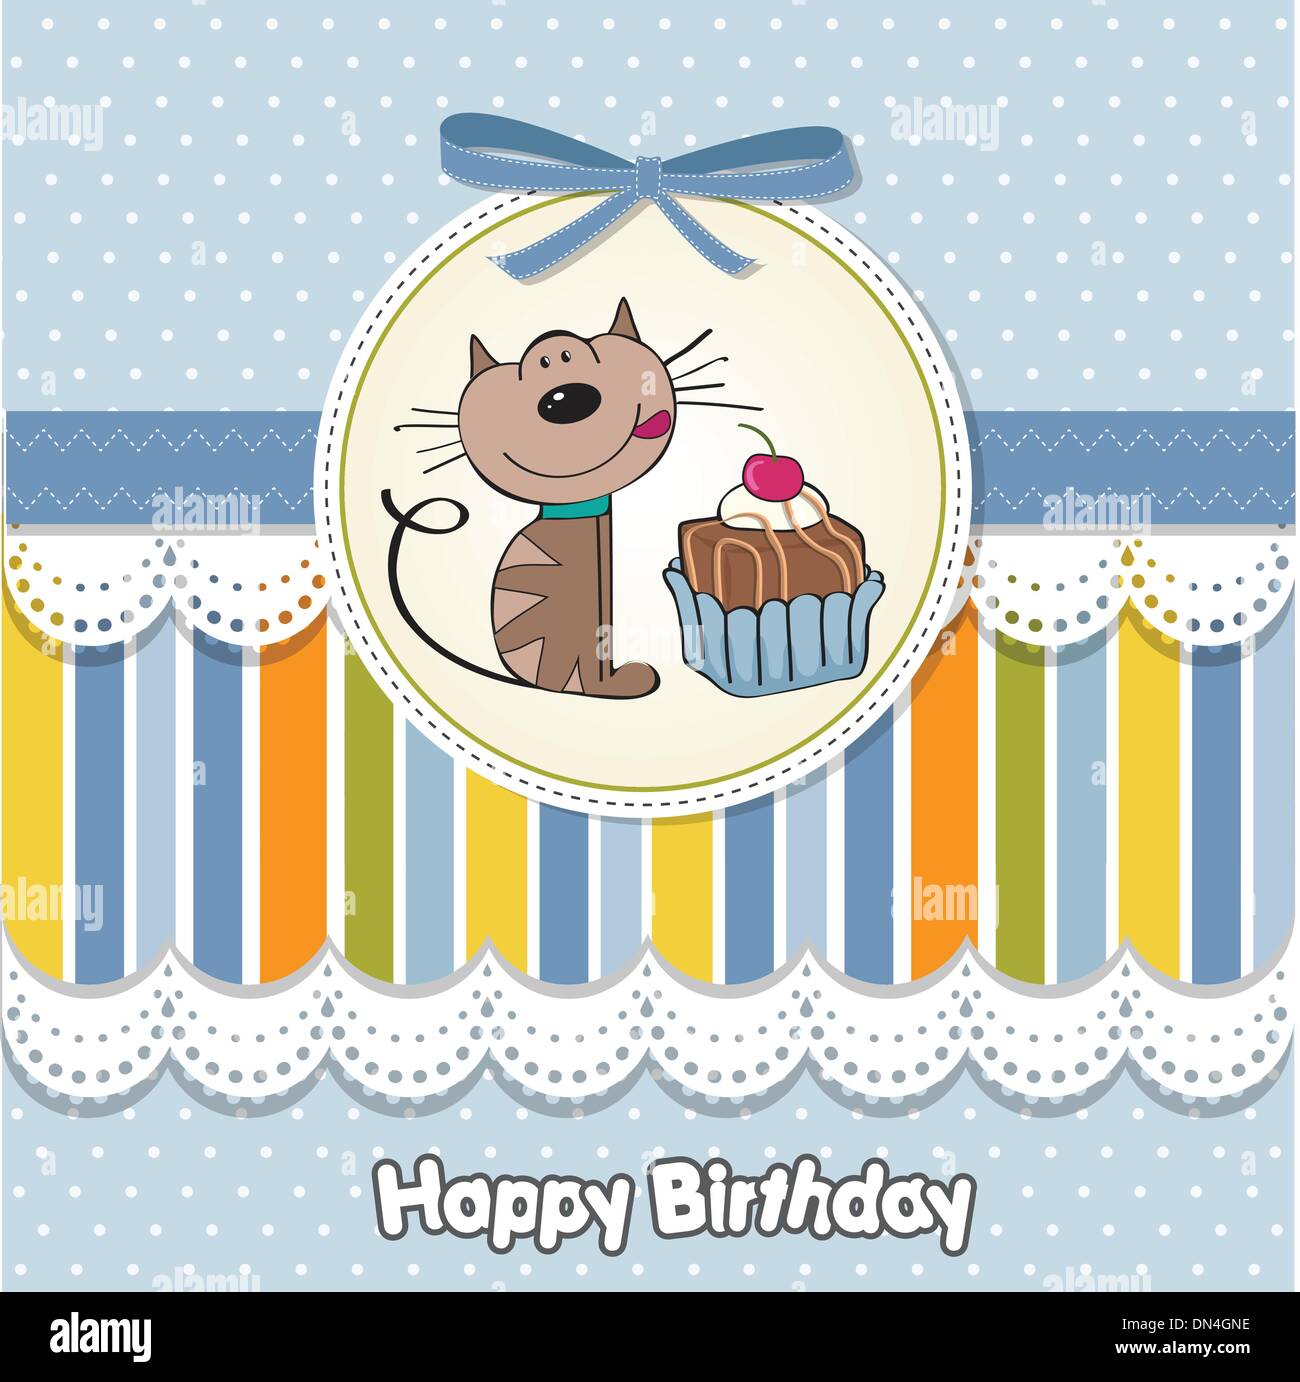 birthday greeting card with a cat waiting to eat a cake Stock Vector